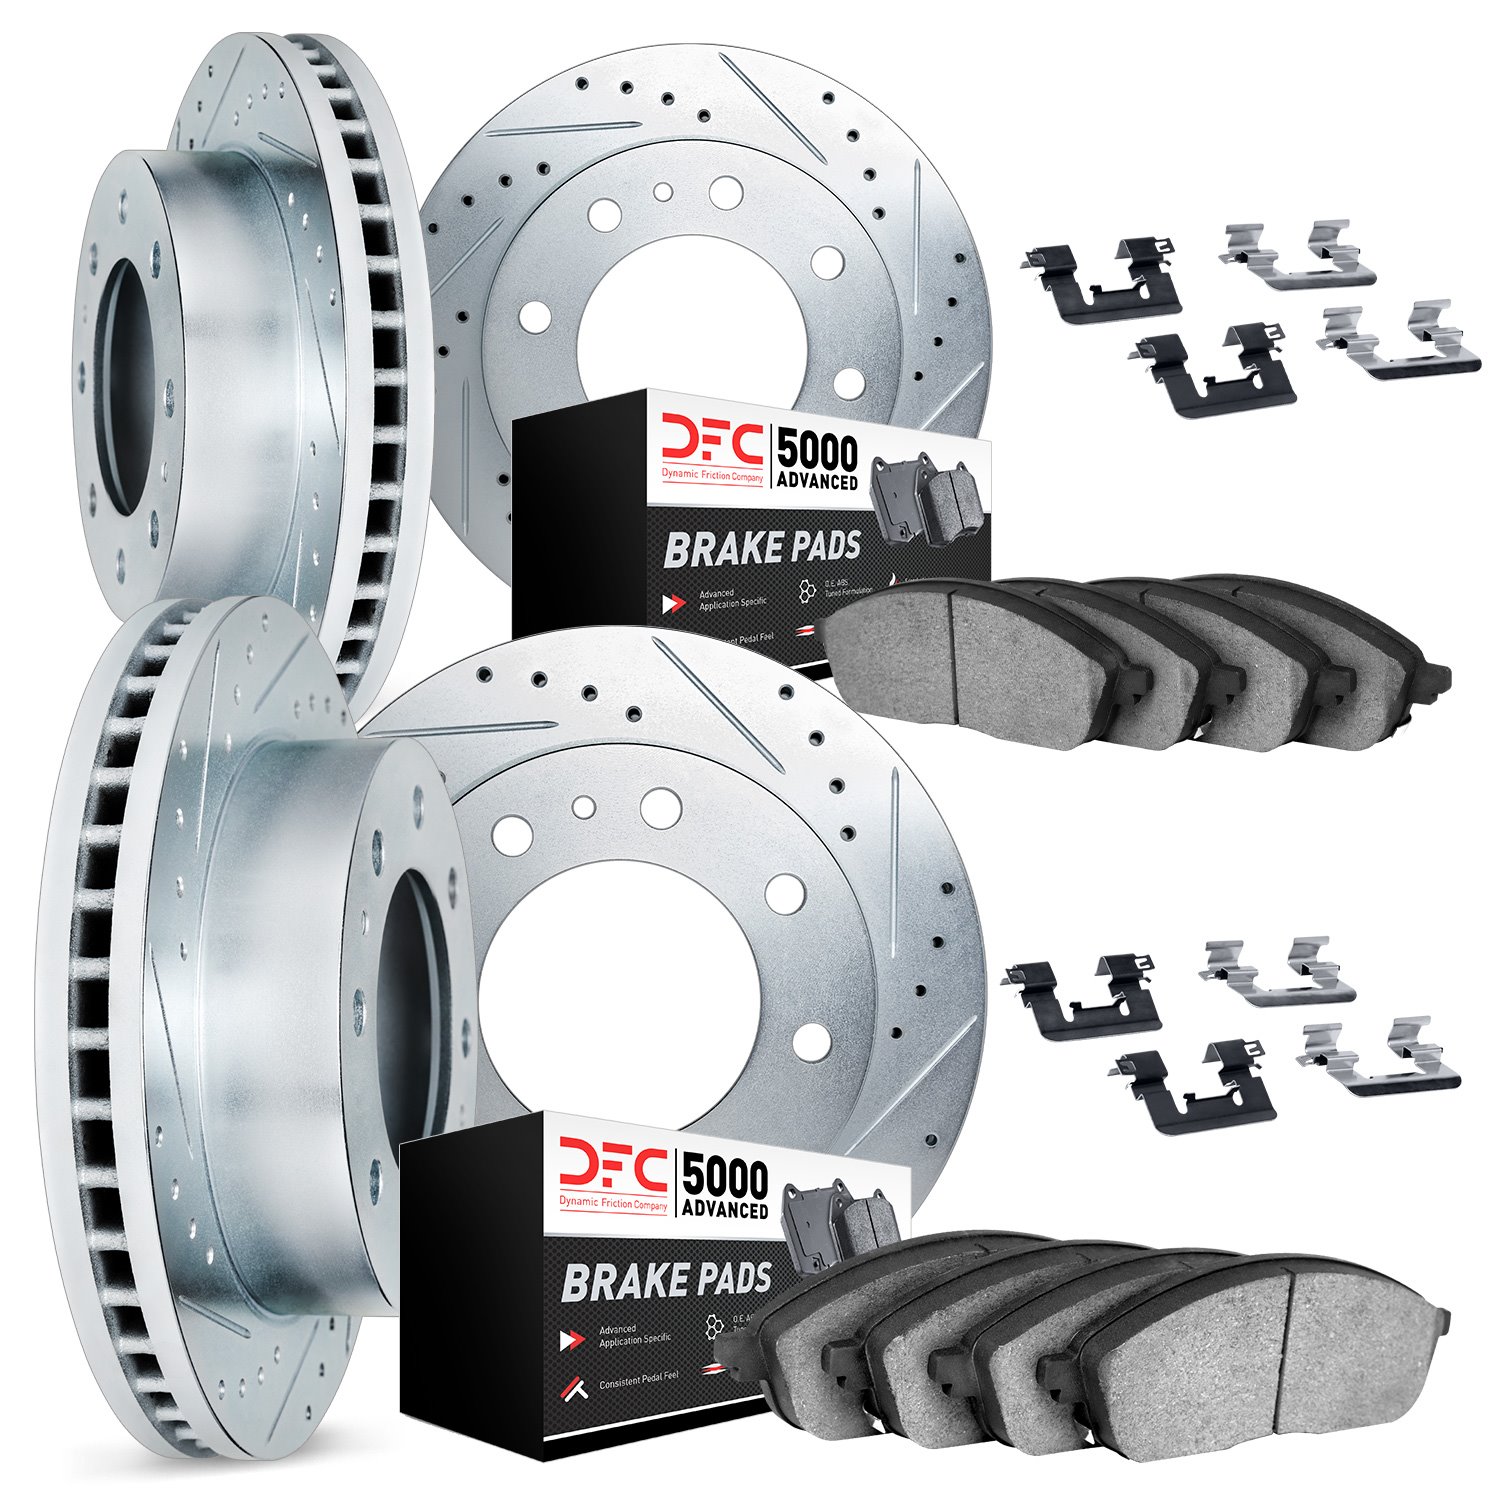 7514-54470 Drilled/Slotted Brake Rotors w/5000 Advanced Brake Pads Kit & Hardware [Silver], Fits Select Ford/Lincoln/Mercury/Maz